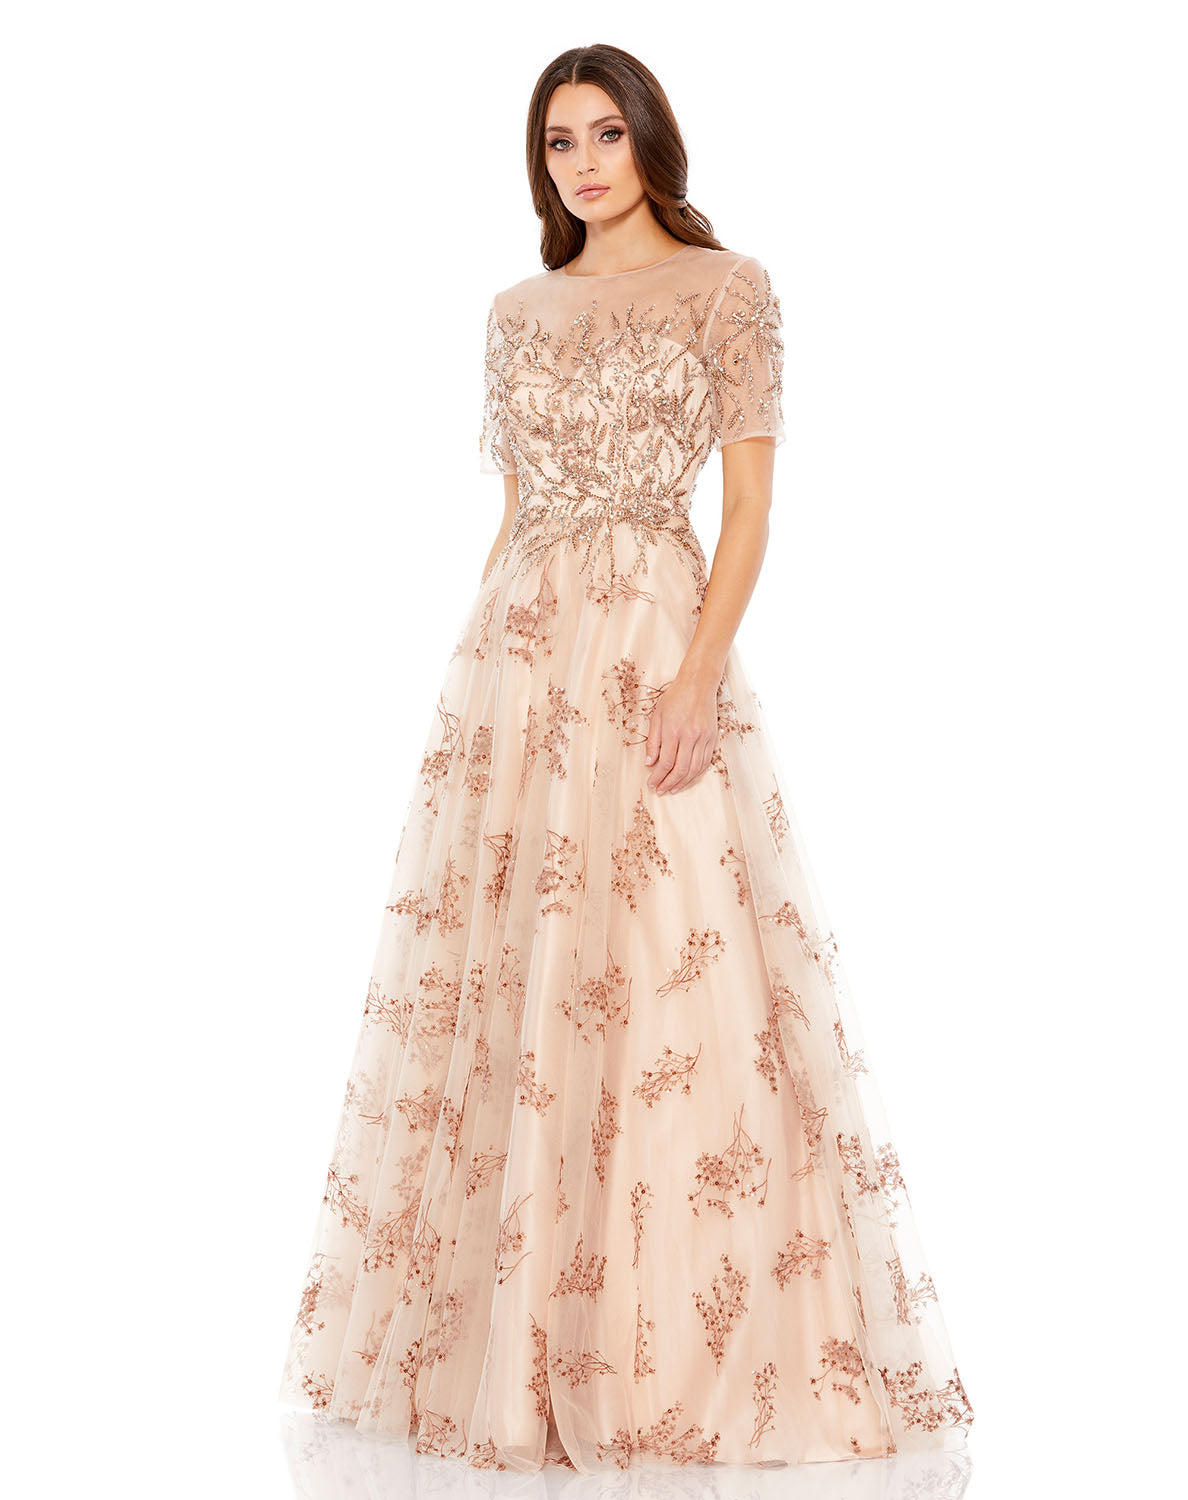 Embellished Illusion Cap Sleeve A Line Gown